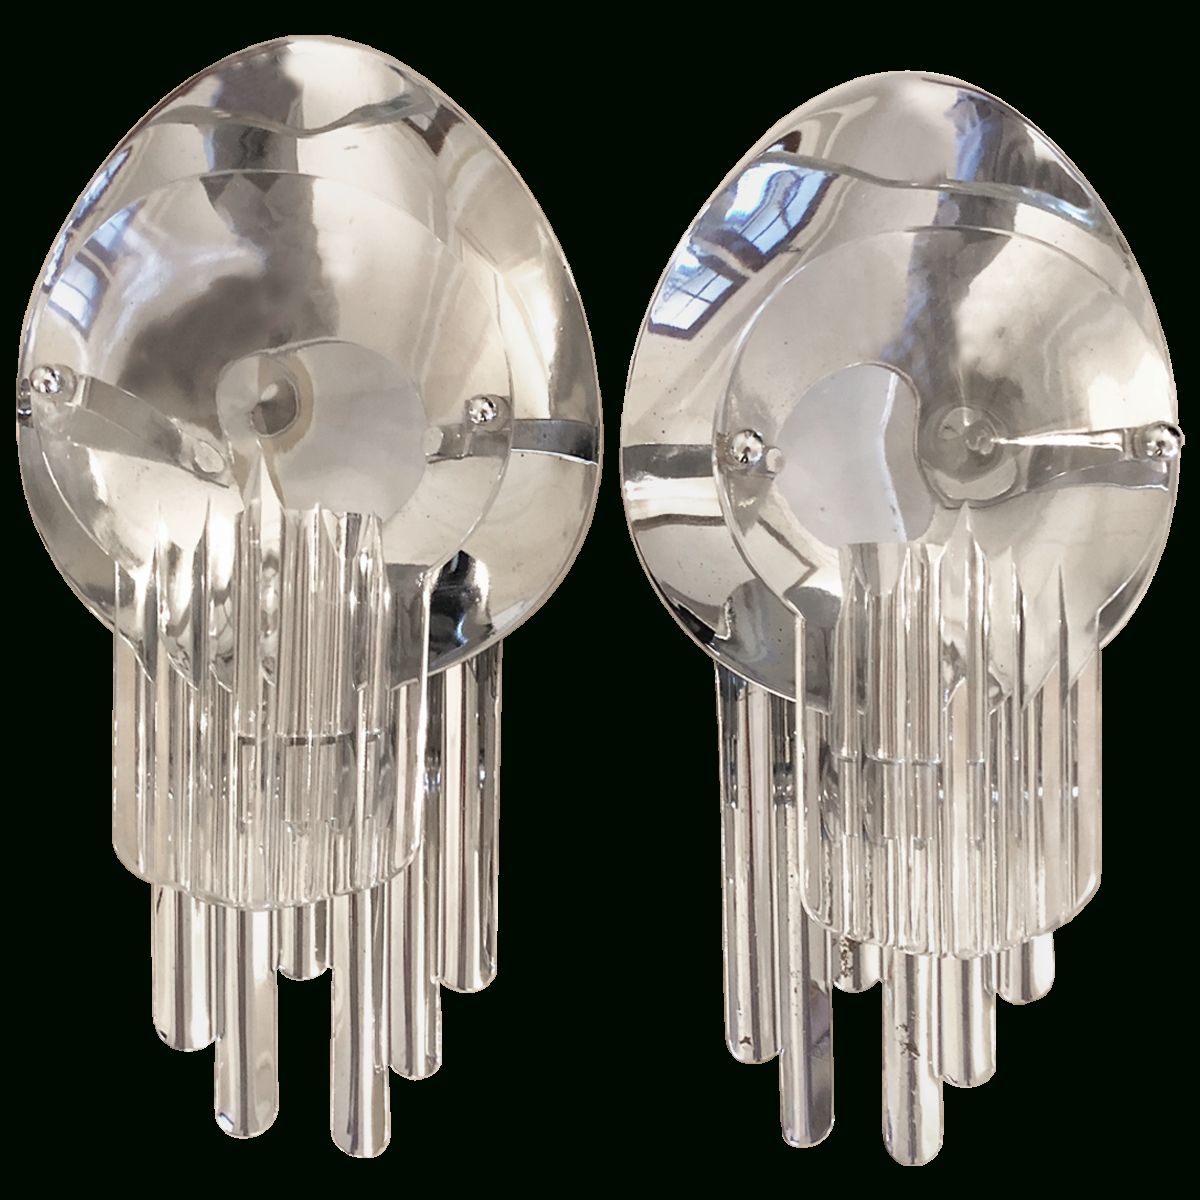 Viyet – Designer Furniture – Lighting – Vintage Art Deco Style Throughout Best And Newest Art Deco Wall Sconces (View 11 of 20)